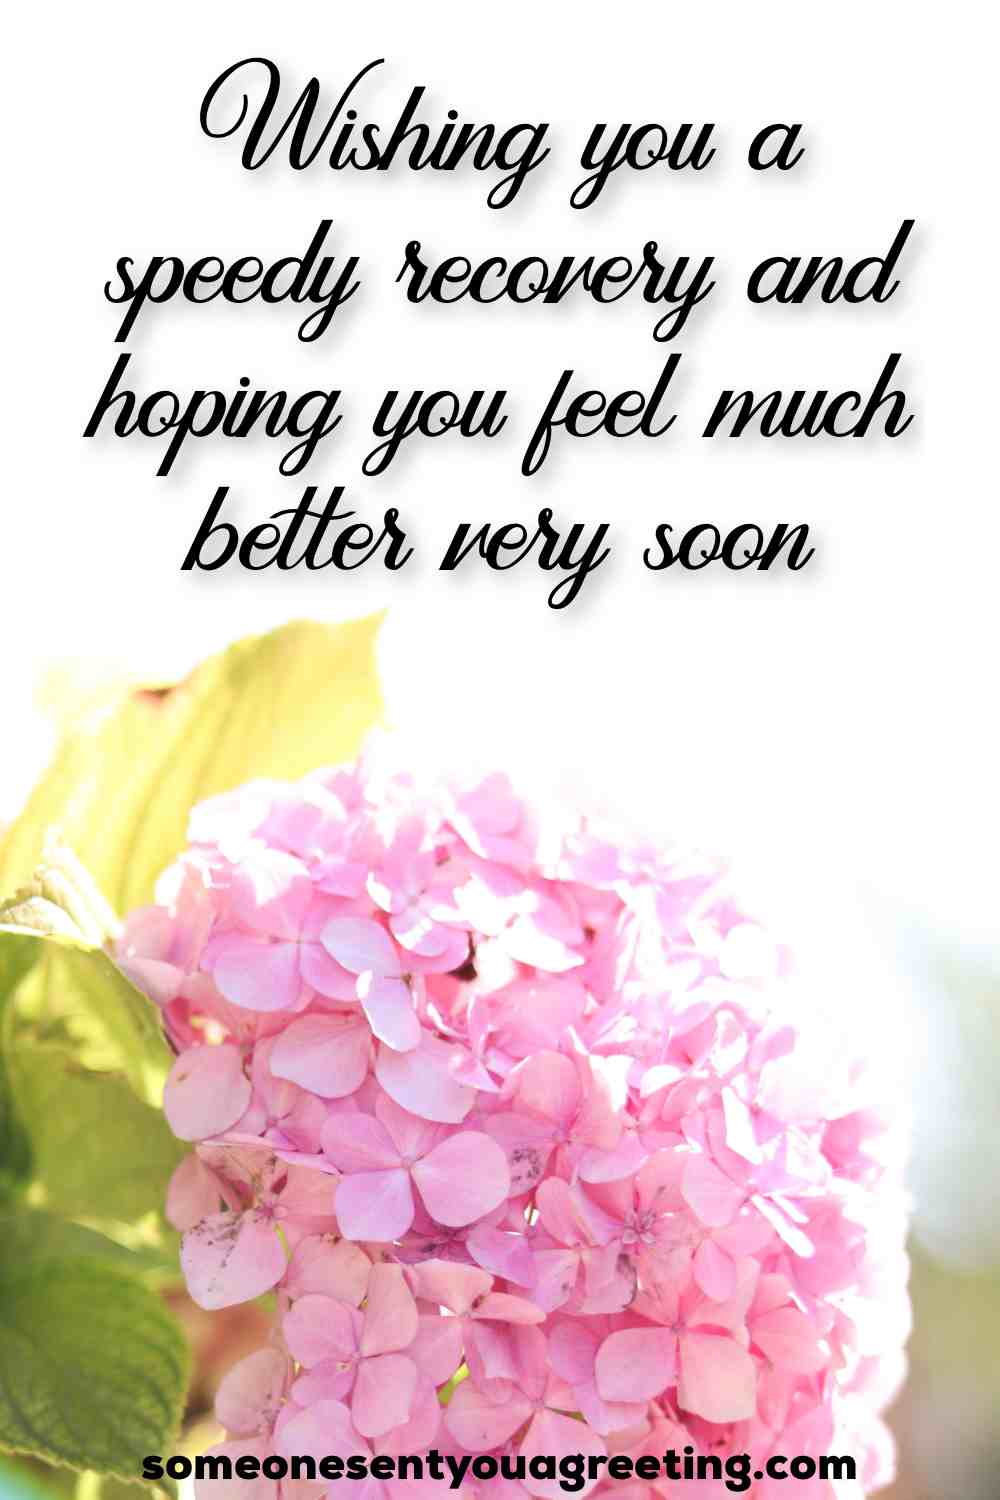 The Best Get Well Wishes for a Speedy Recovery - Someone Sent You ...